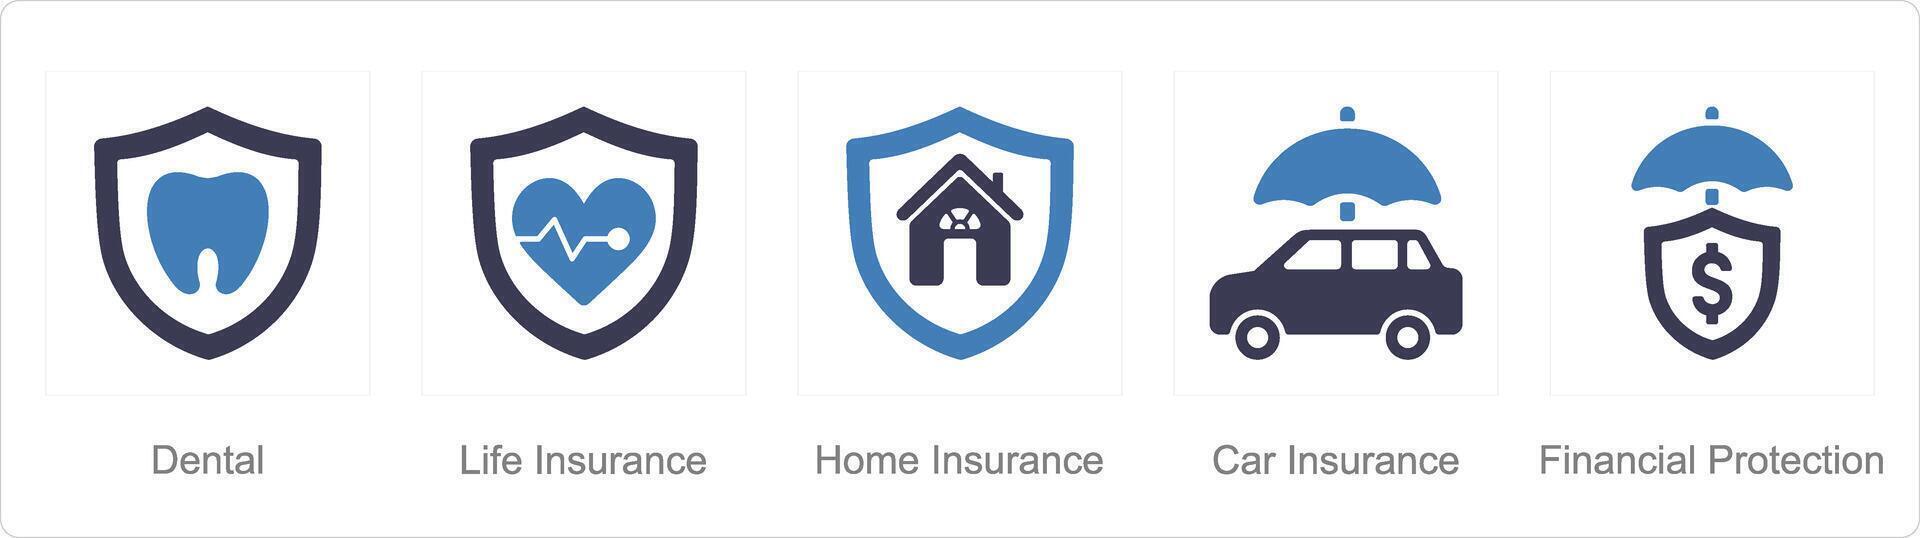 A set of 5 Insurance icons as dental, life insurance, home insurance vector